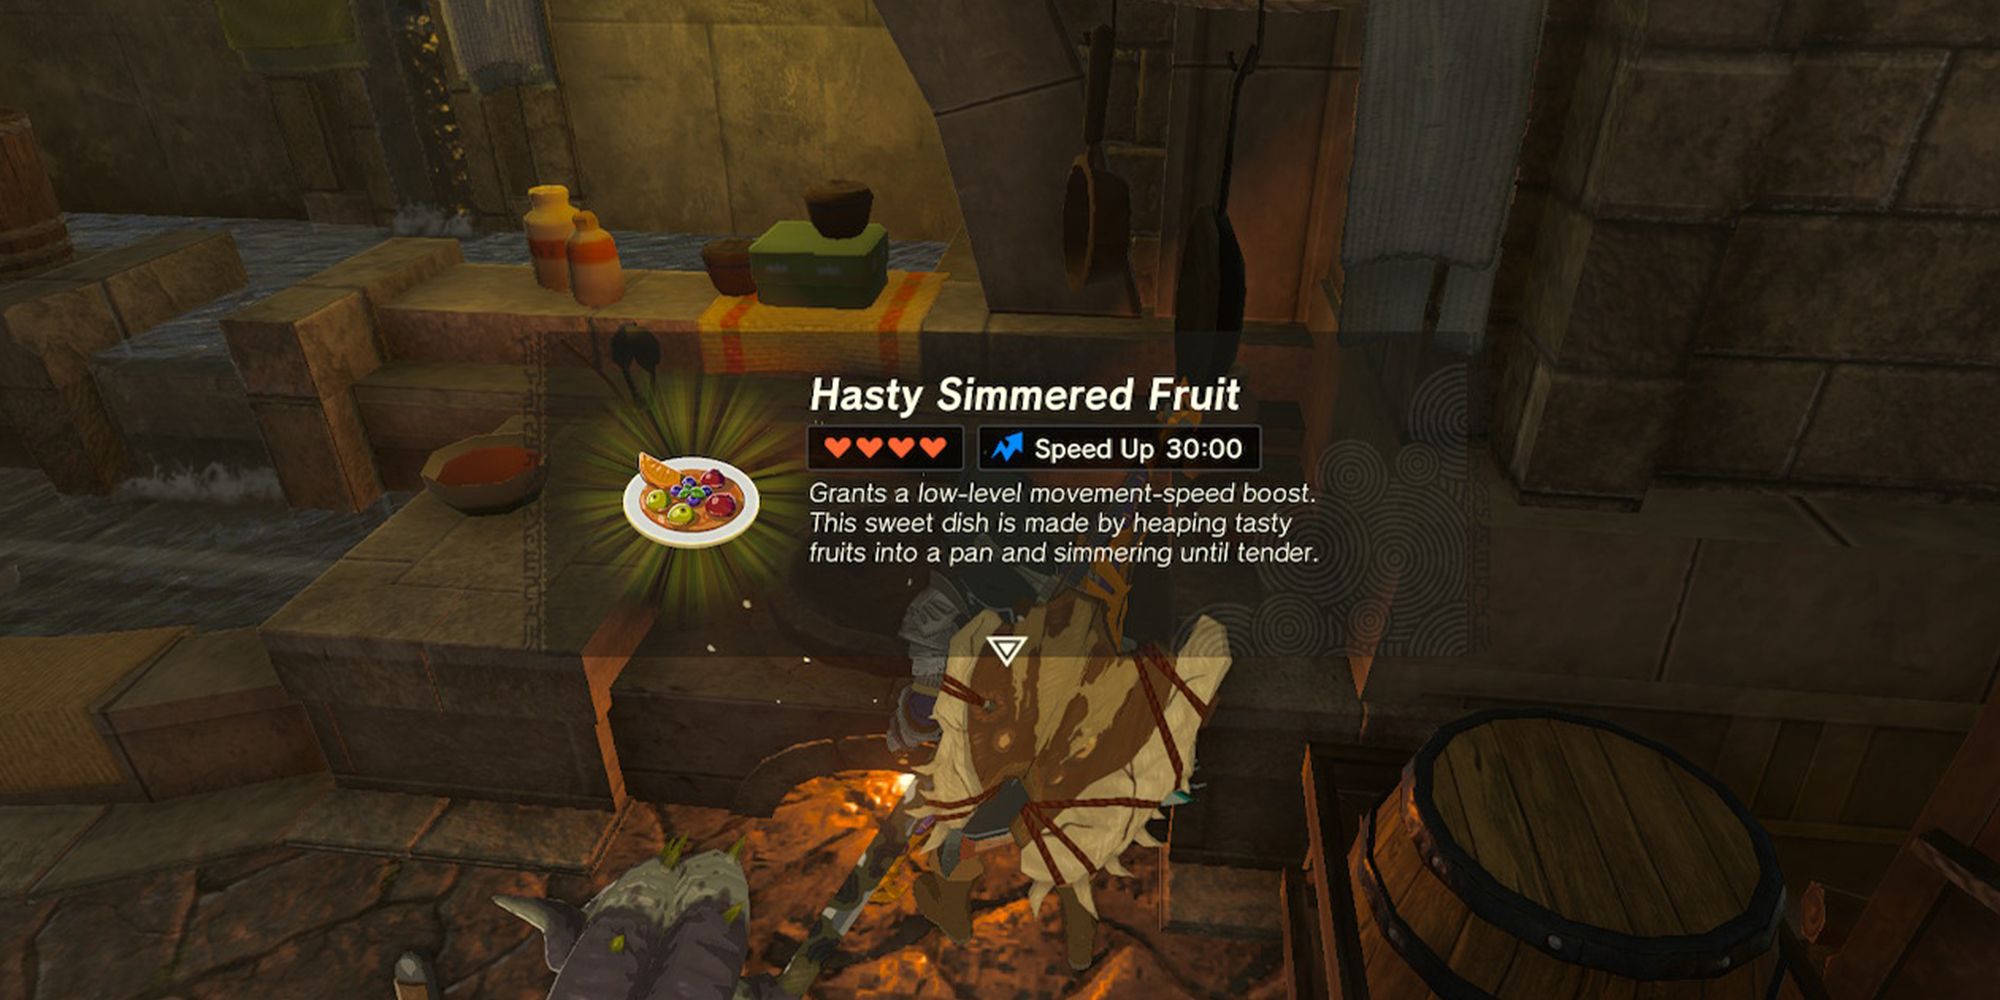 Hasty Simmered Fruit recipe